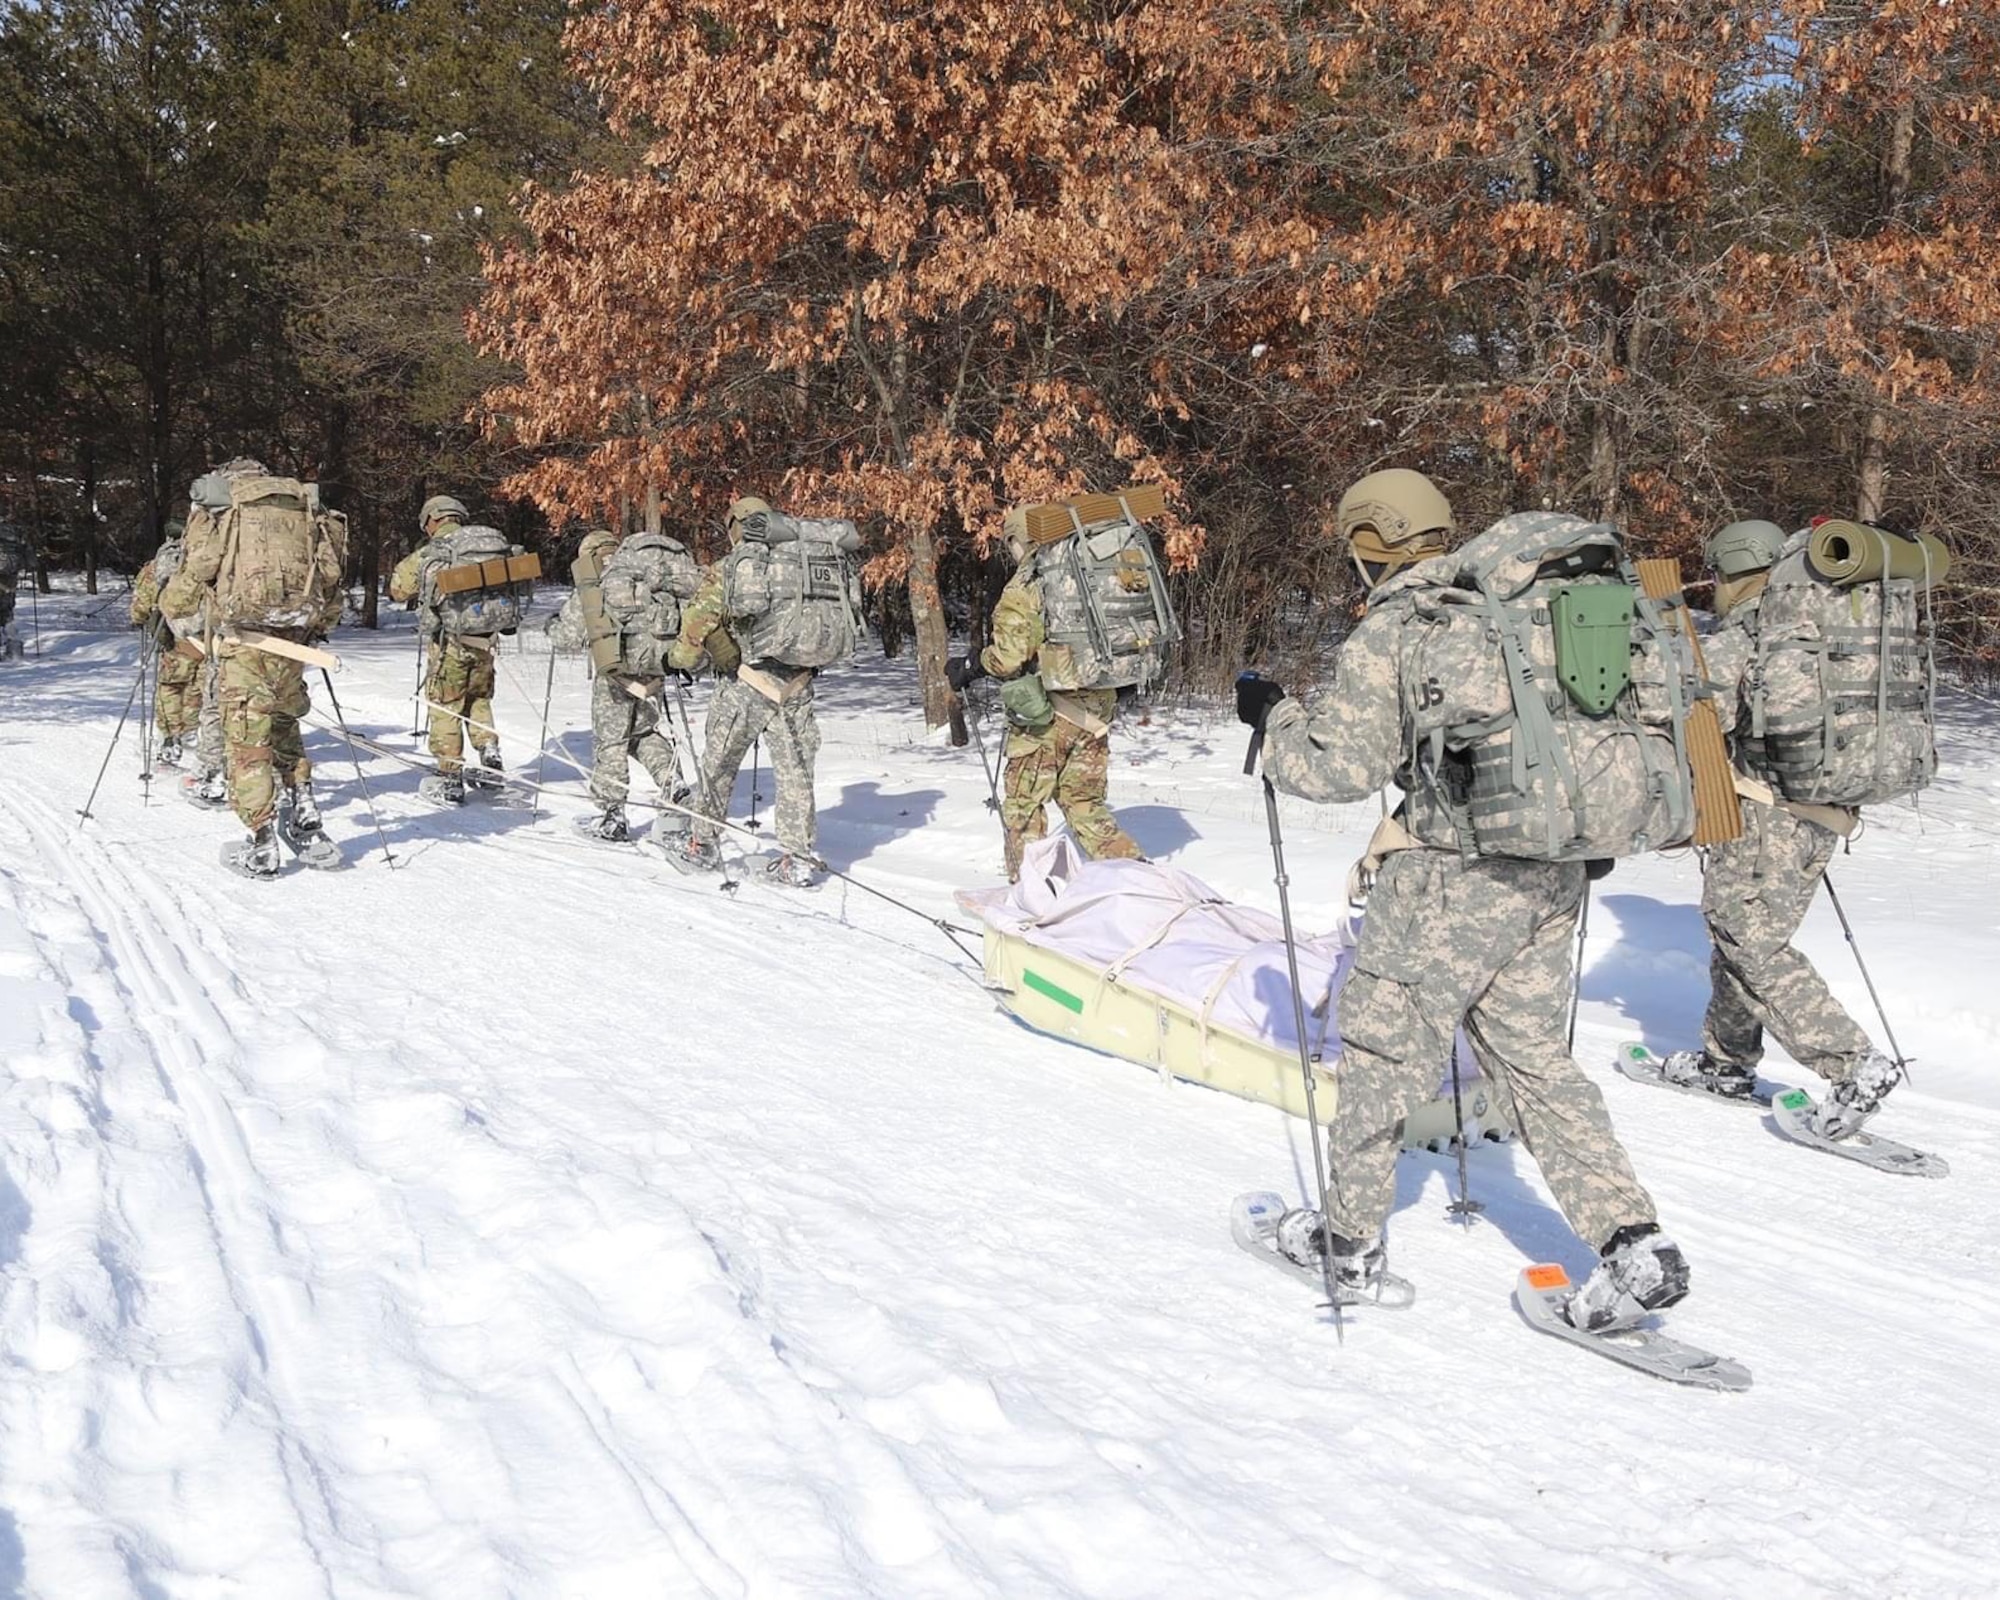 Airmen pulling ahkio sled at U.S. Army Cold Weather Operations Course.